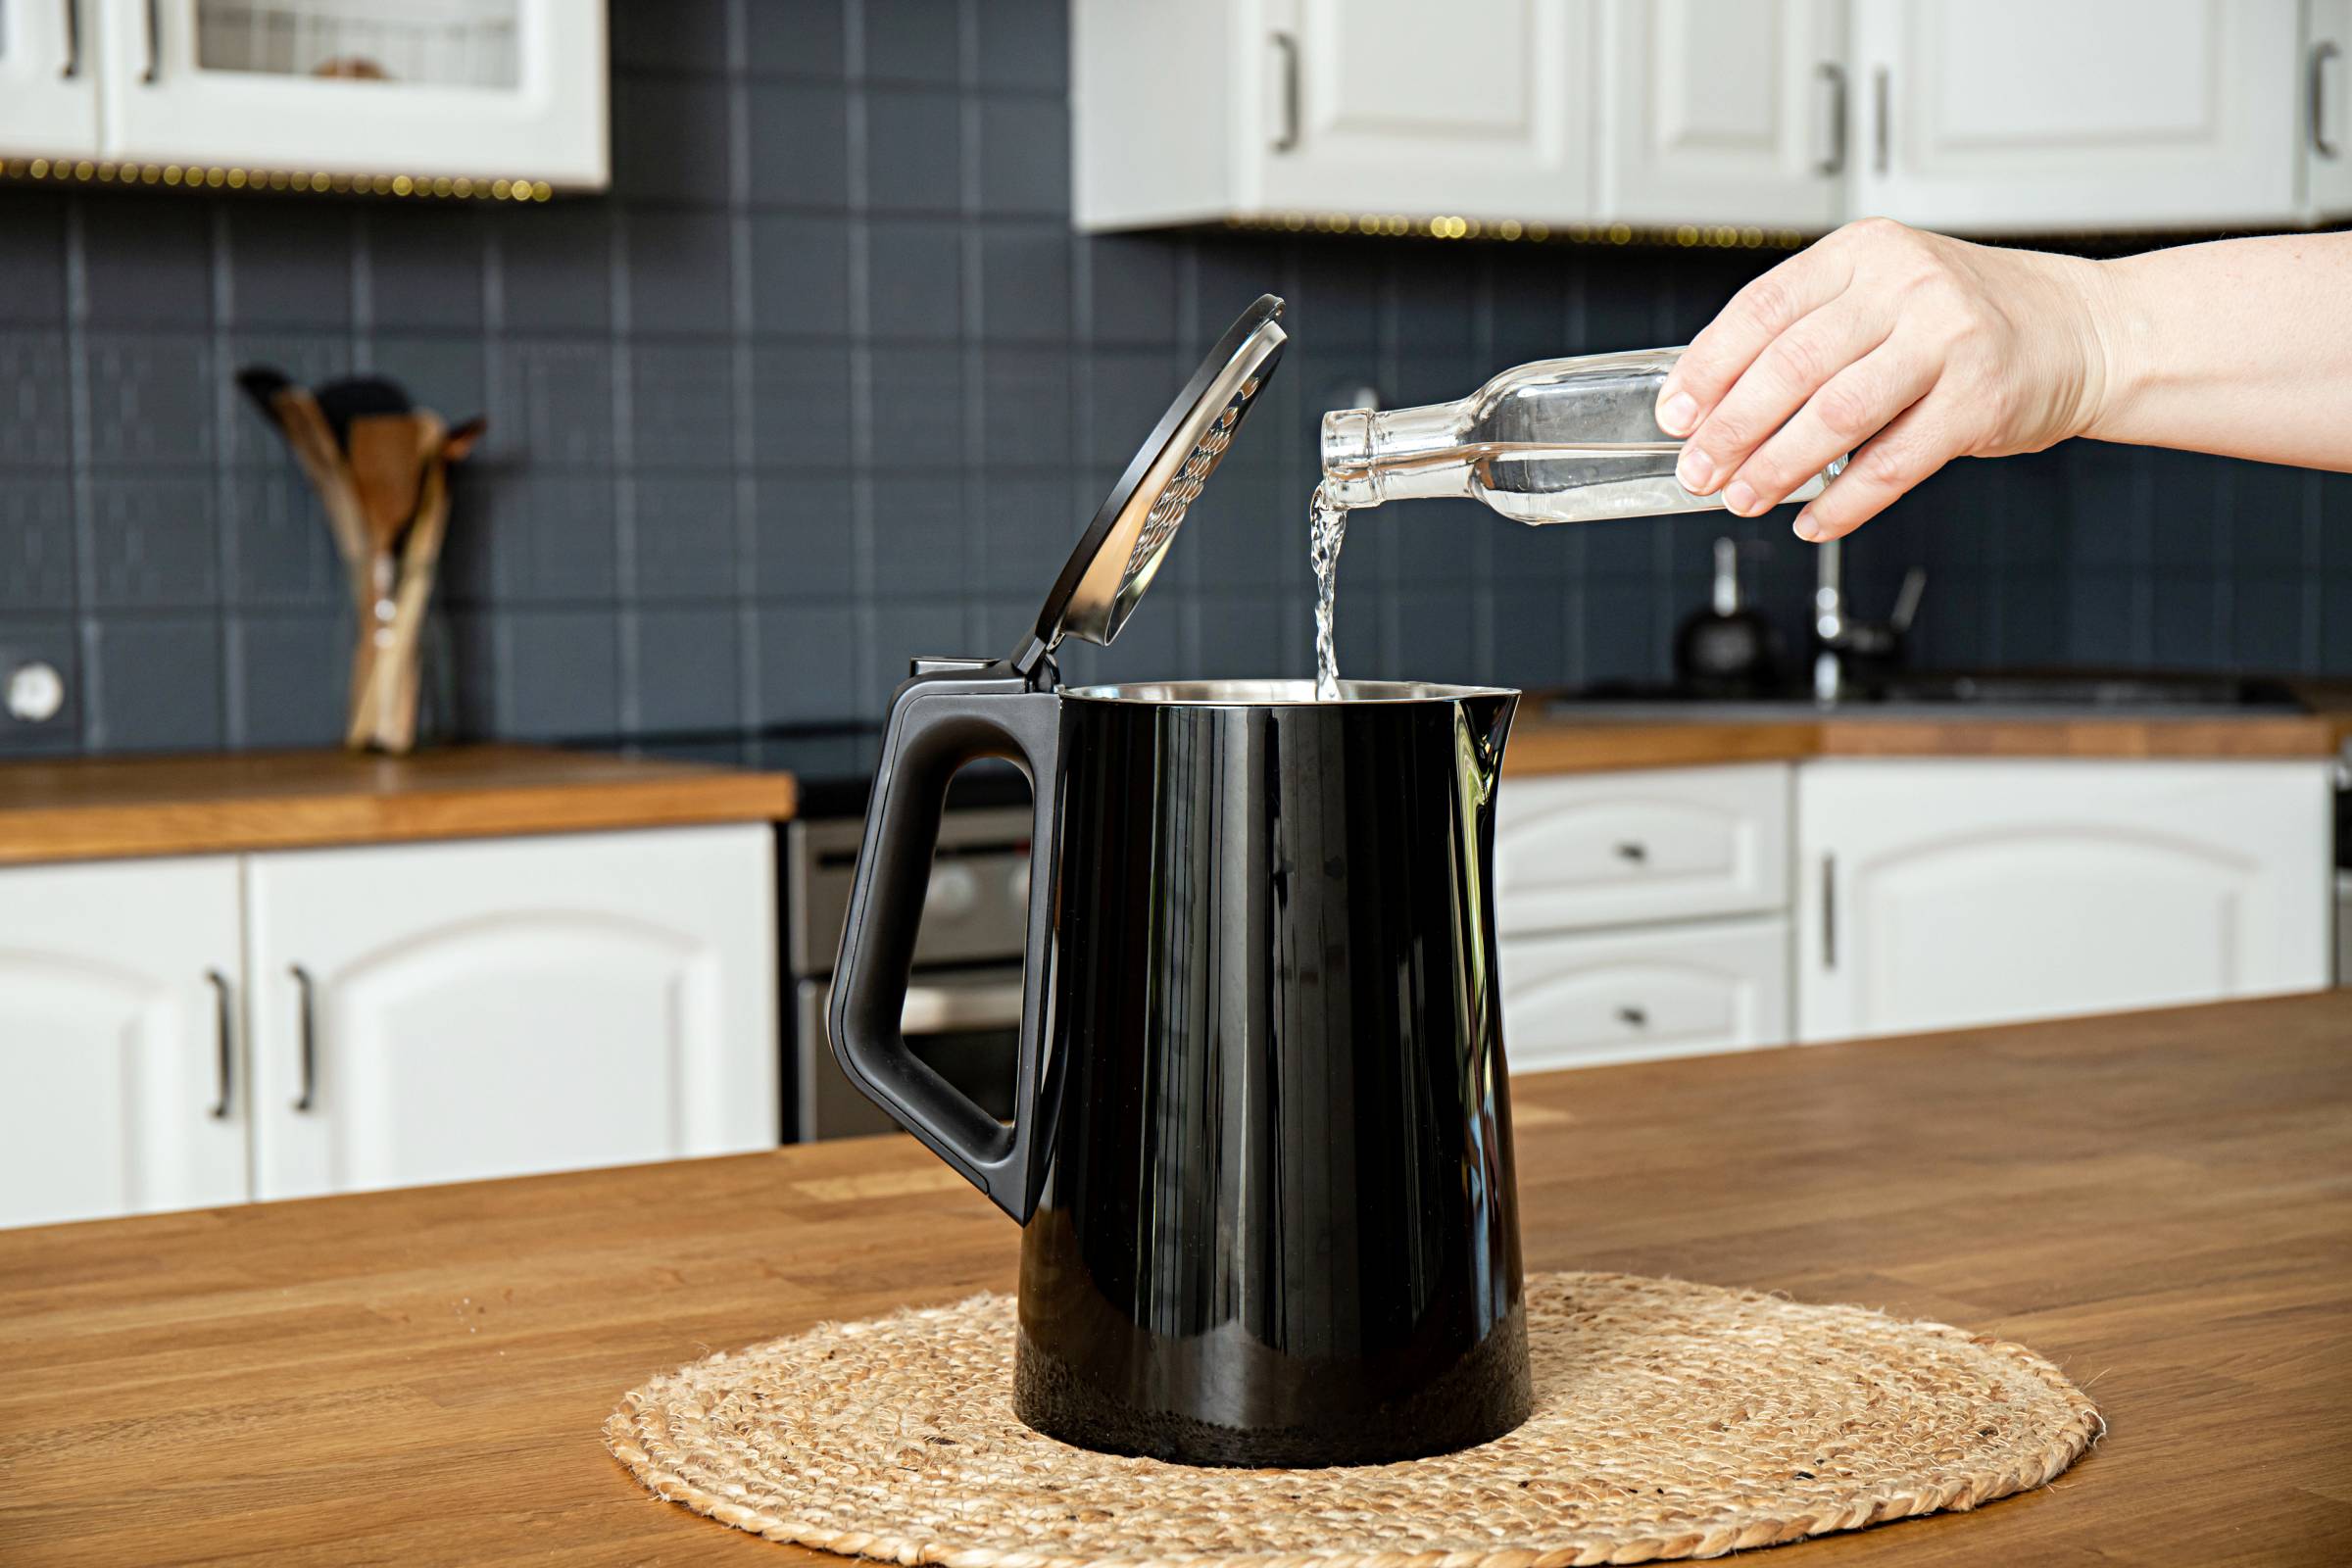 pouring white vinegar into an electric kettle